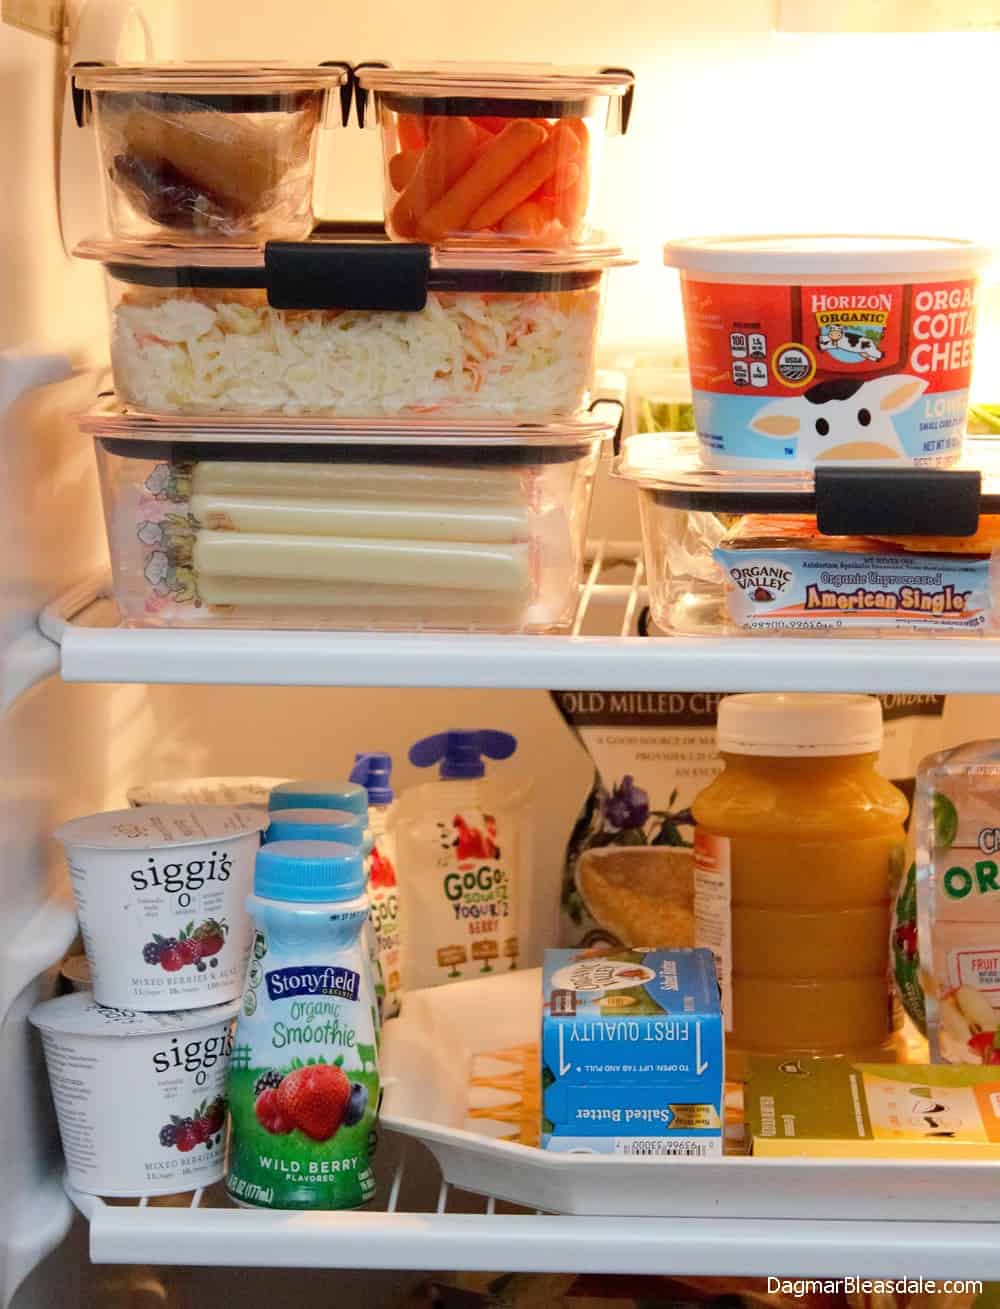 Refrigerator Organization The Best Tips And Hacks You Ll Want To Know,Slippery Nipple Recipe Cocktail Ingredients